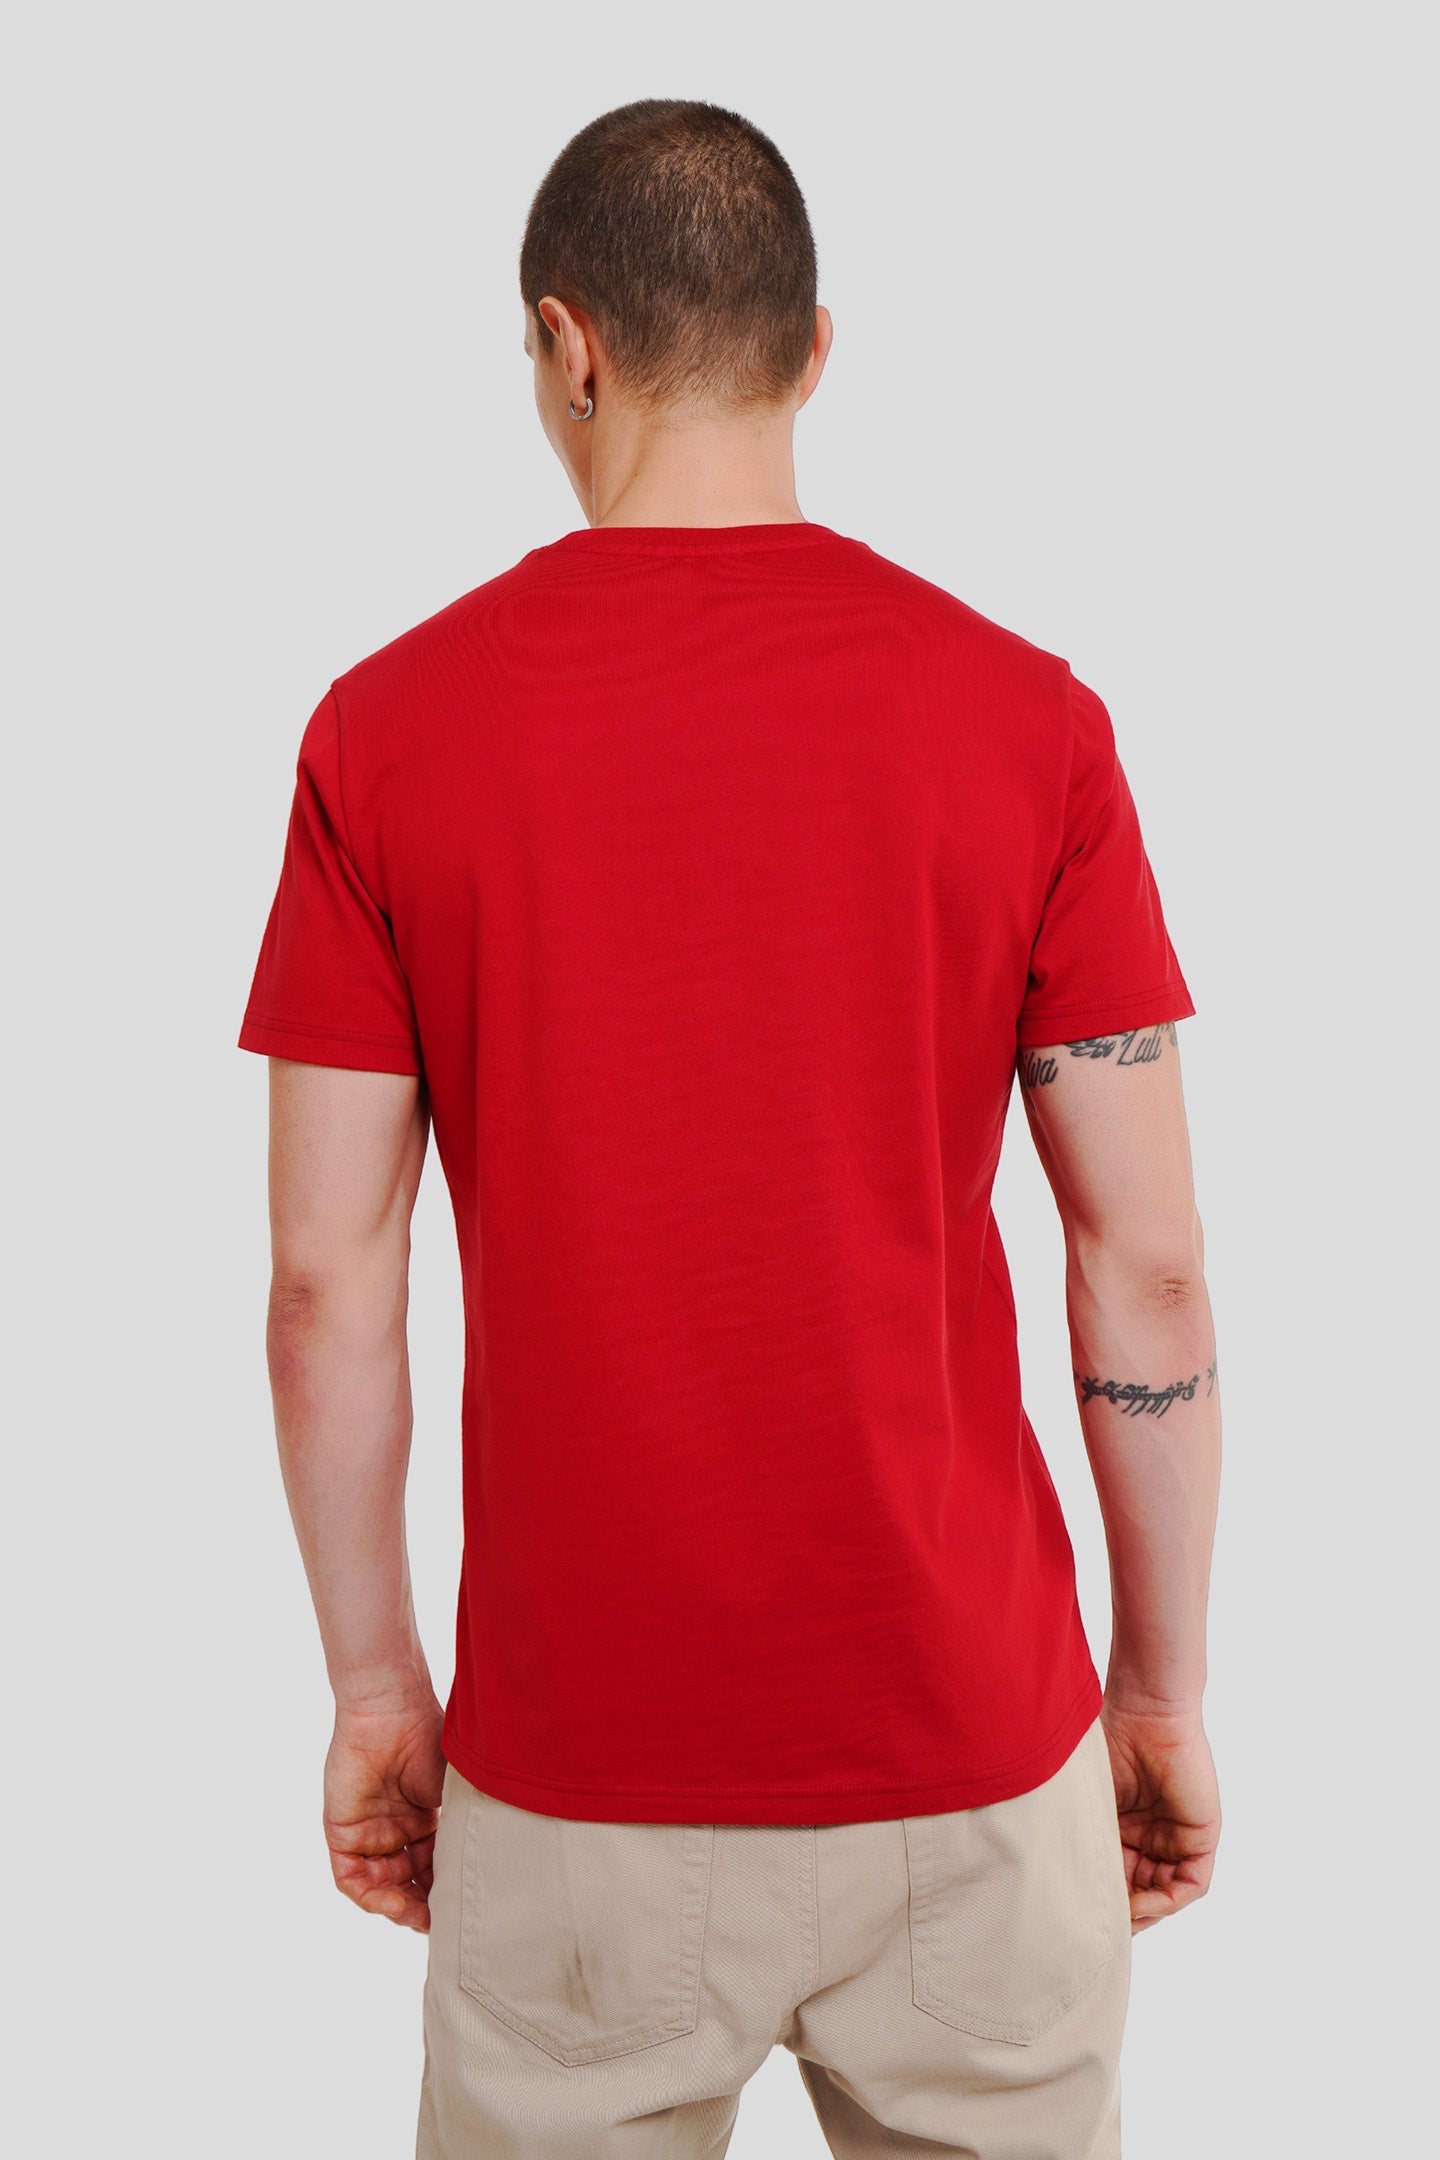 Fightclub Red Printed T Shirt Men Regular Fit With Front Design Pic 2